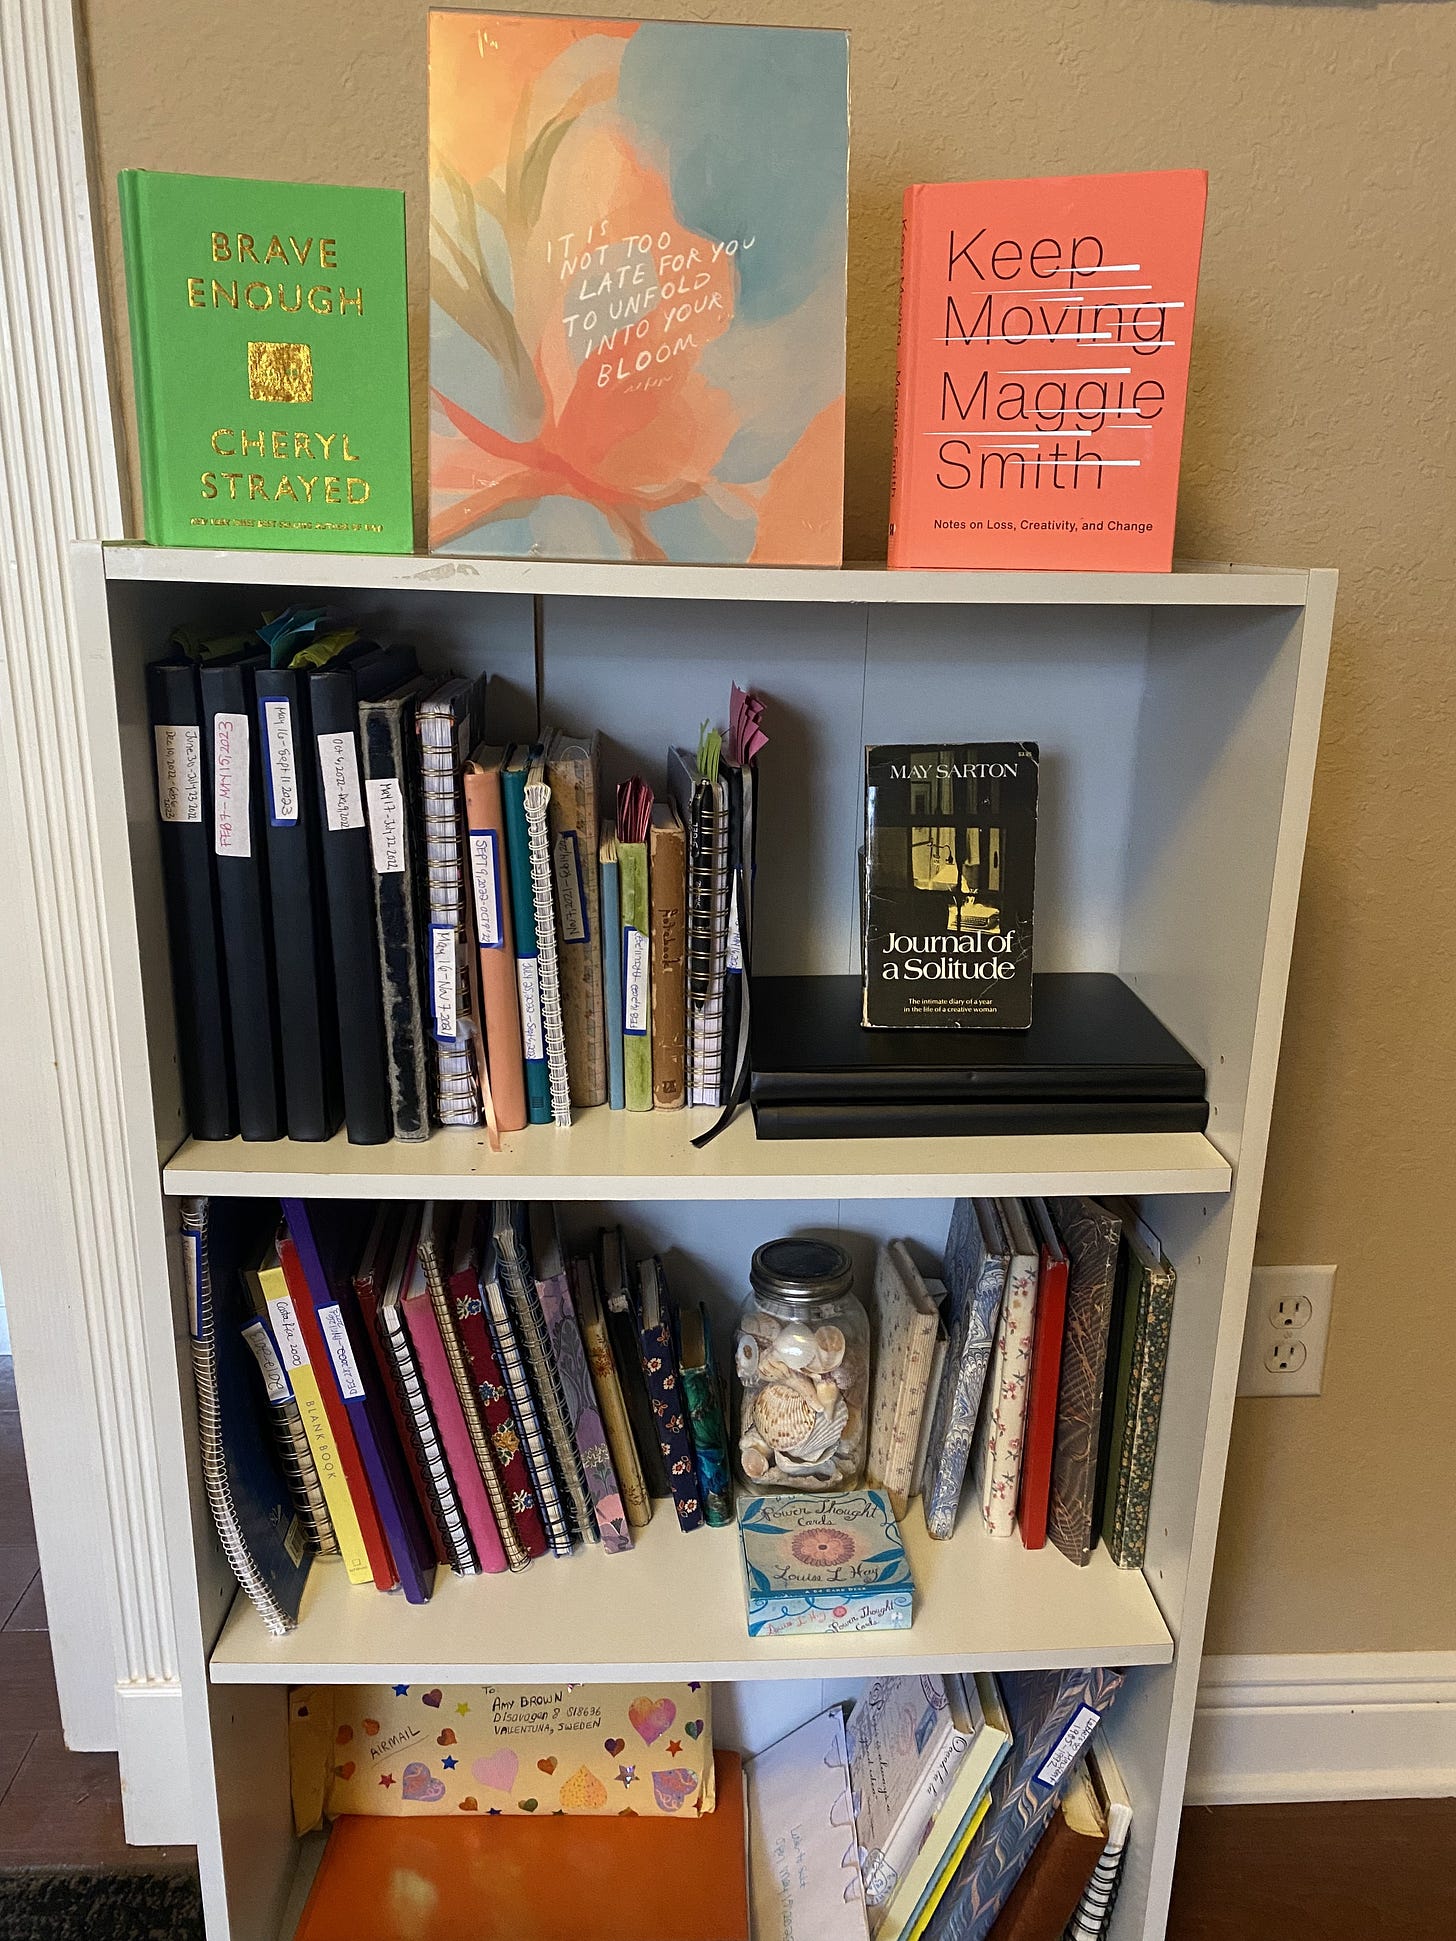 bookshelf with journals, Maggie Smith's Keep Moving, and other books